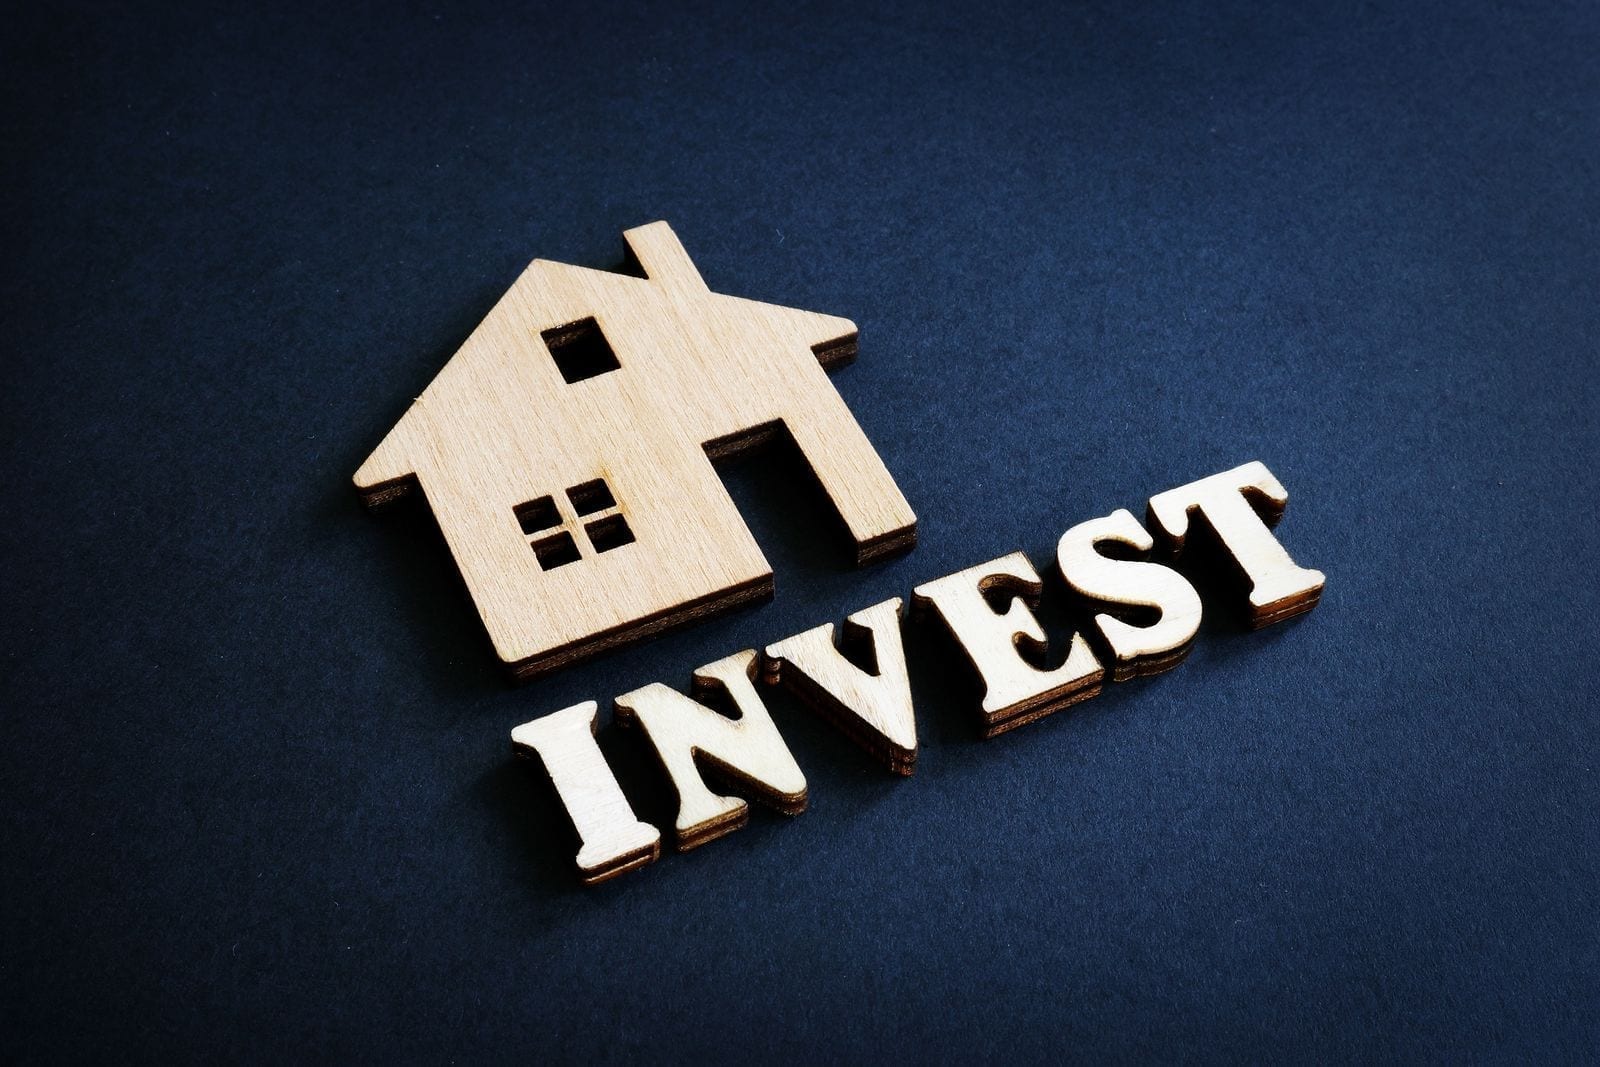 About Real Estate Investing